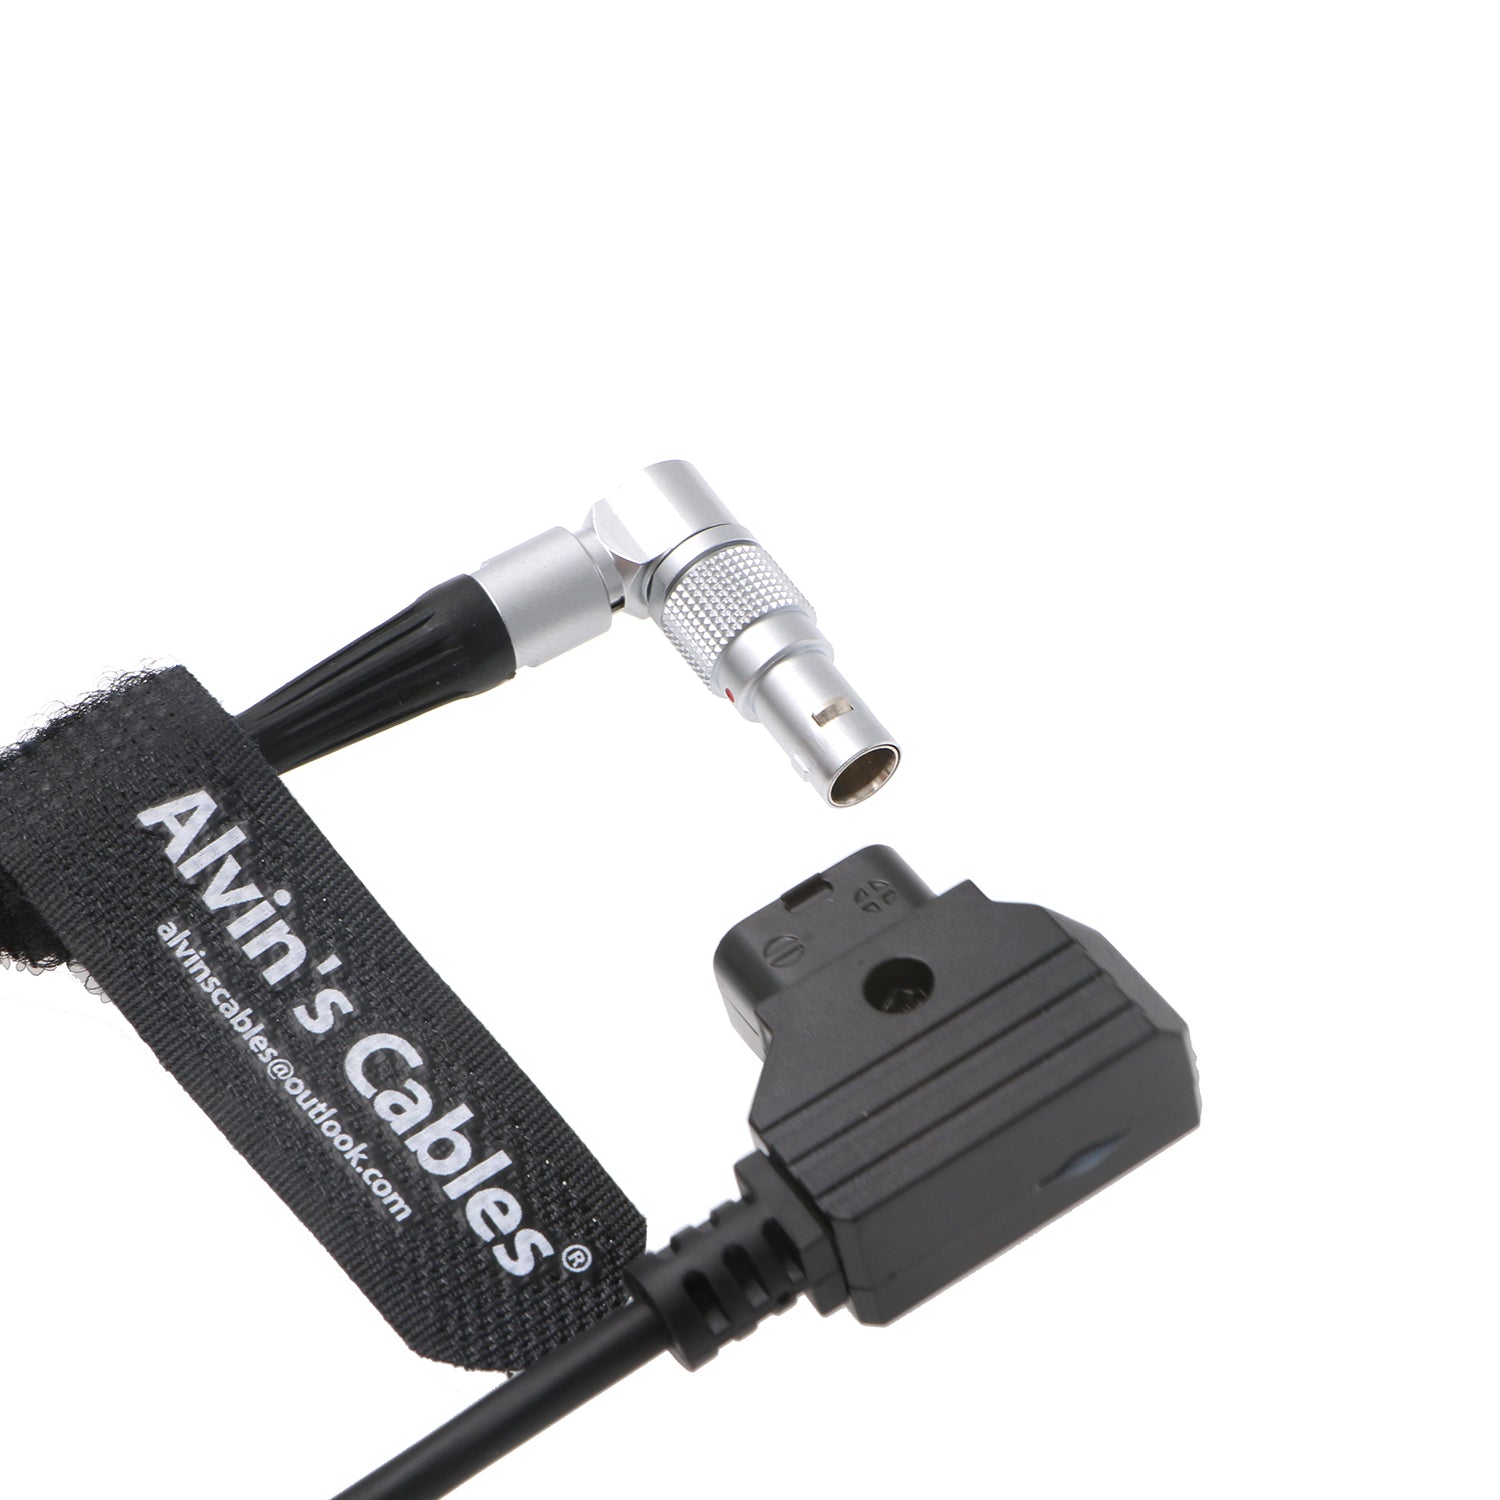 Alvin’s Cables Power-Cable for DJI-Wireless-Follow-Focus Rotatable Right Angle 6 Pin to D-tap Power-Cord